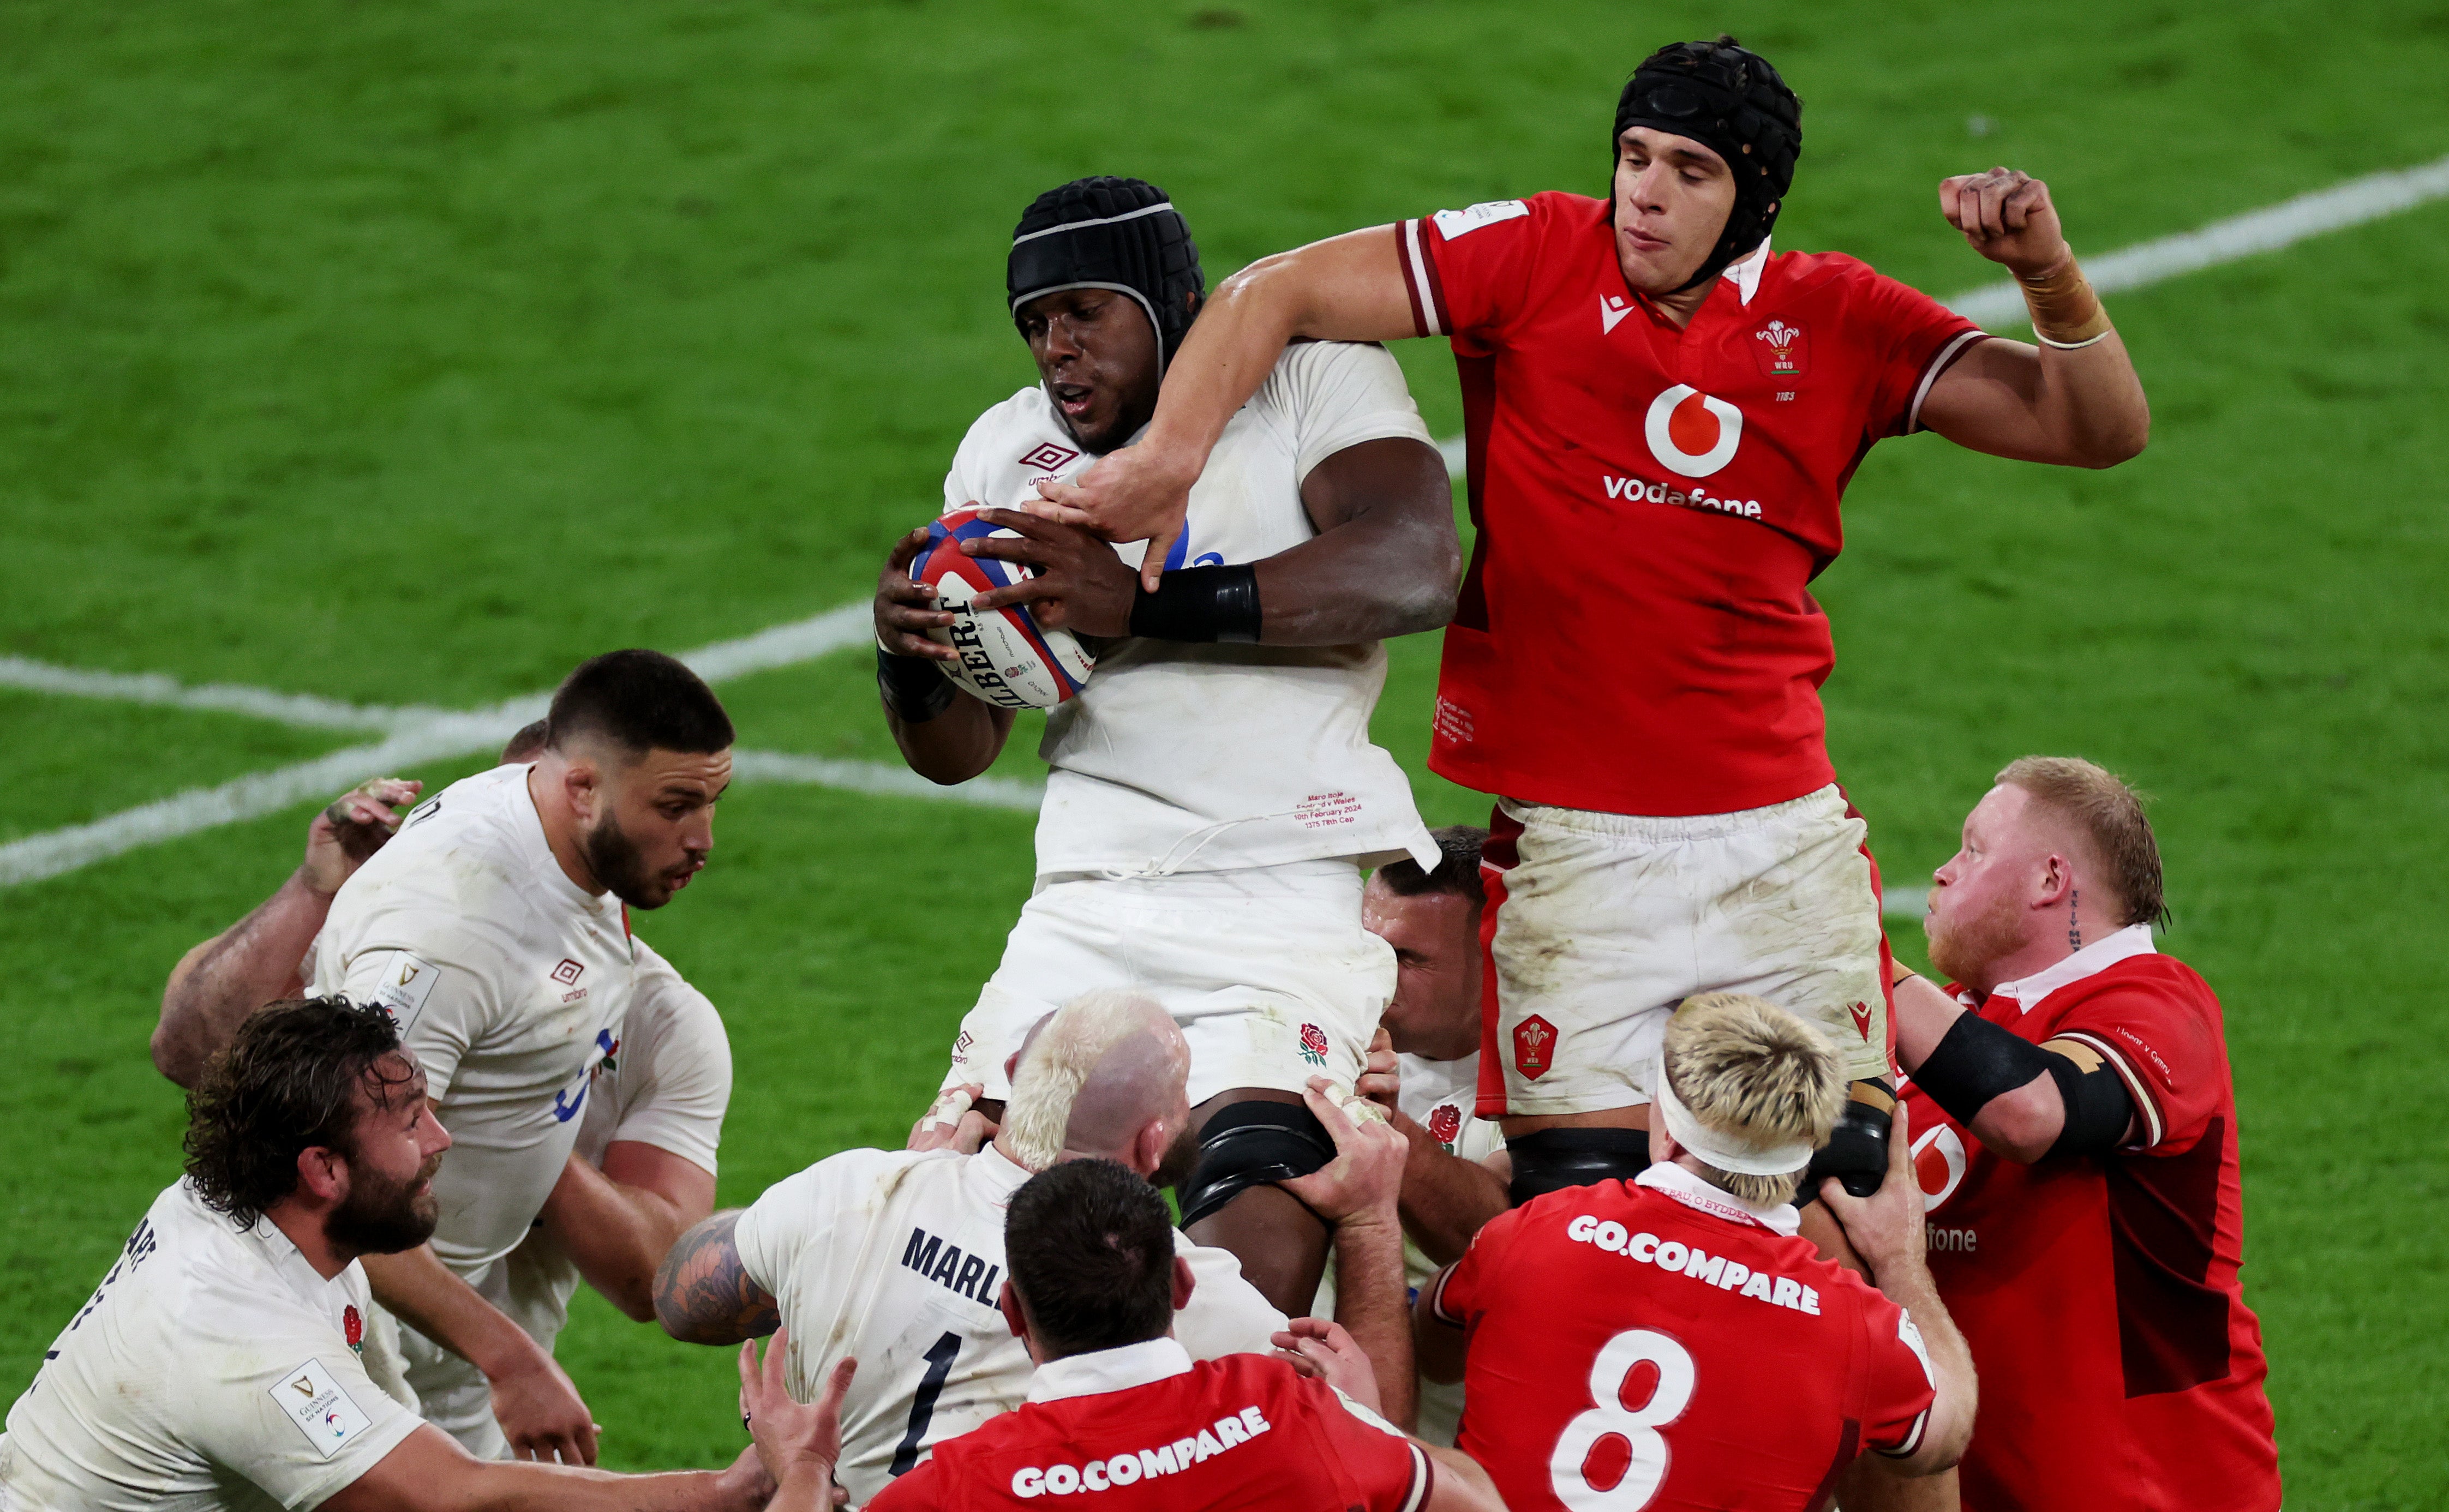 Wales and England will tussle on ‘Super Saturday’